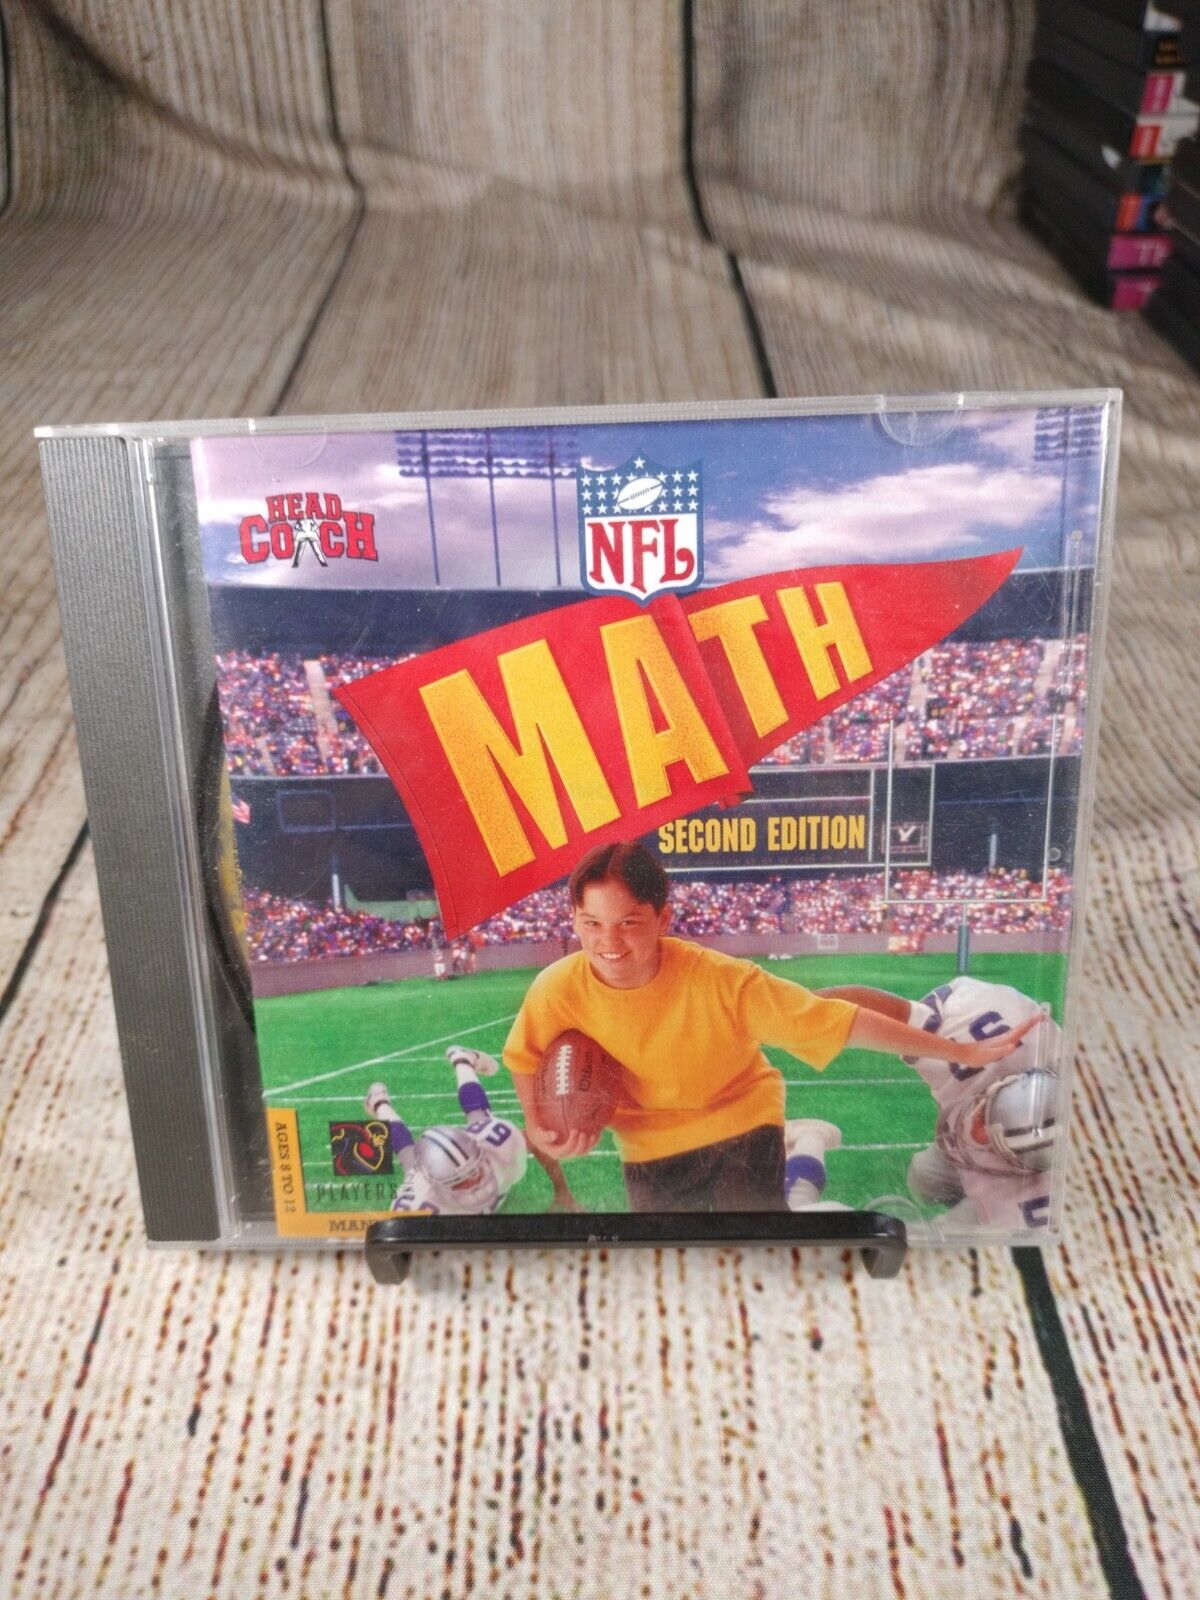 NFL Math Second Edition Head Coach 1996 PC MAC CD-ROM Software Game MED5462K01